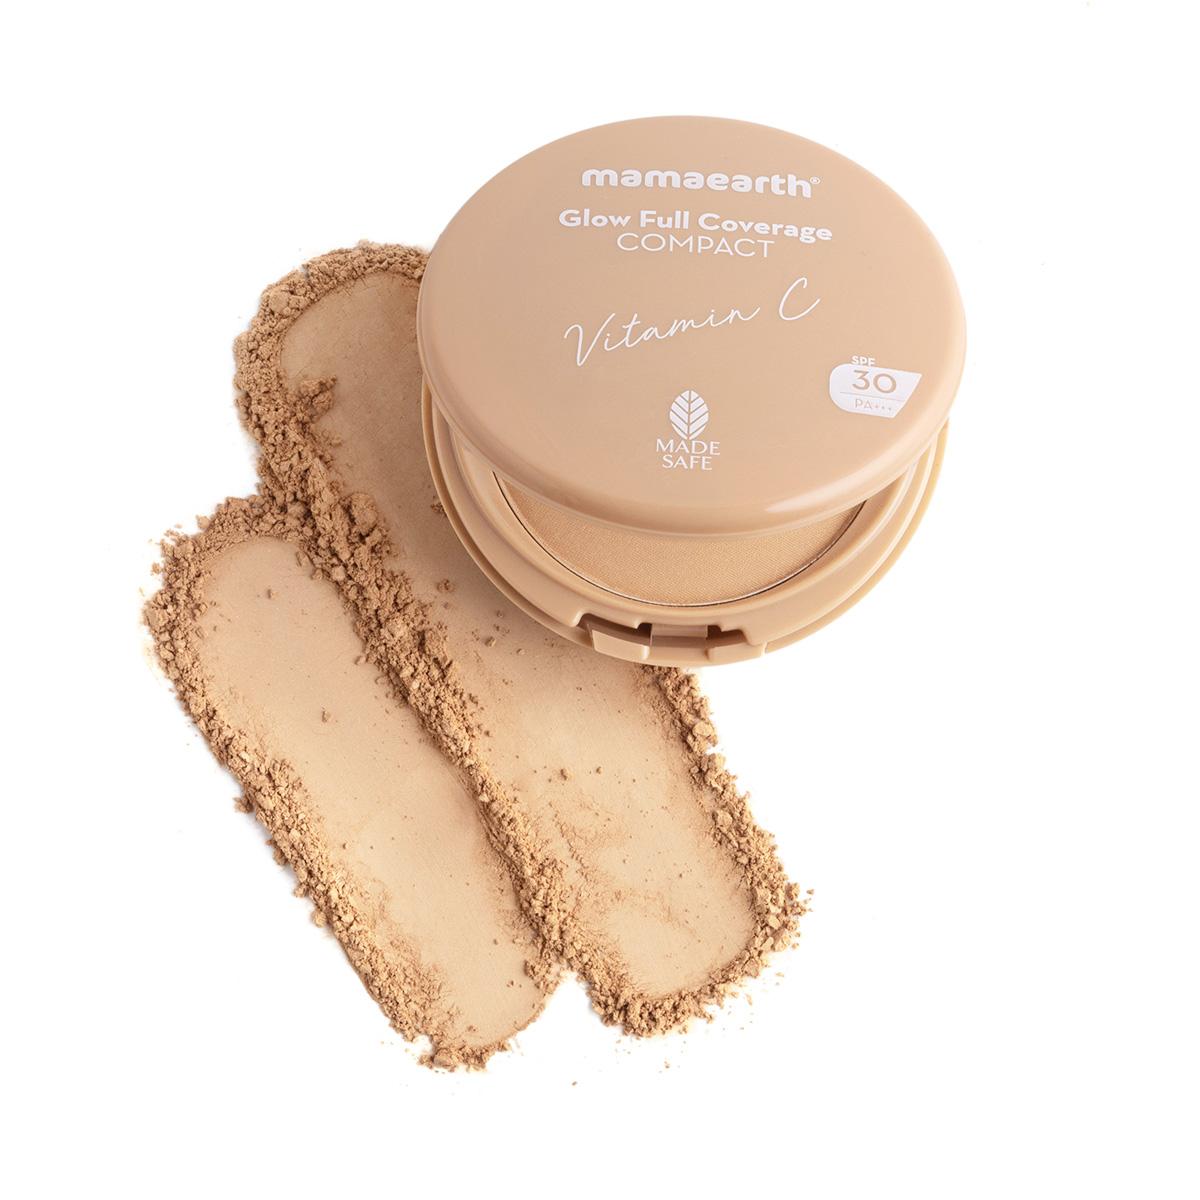 glow full coverage compact with spf 30 - 9g | almond glow